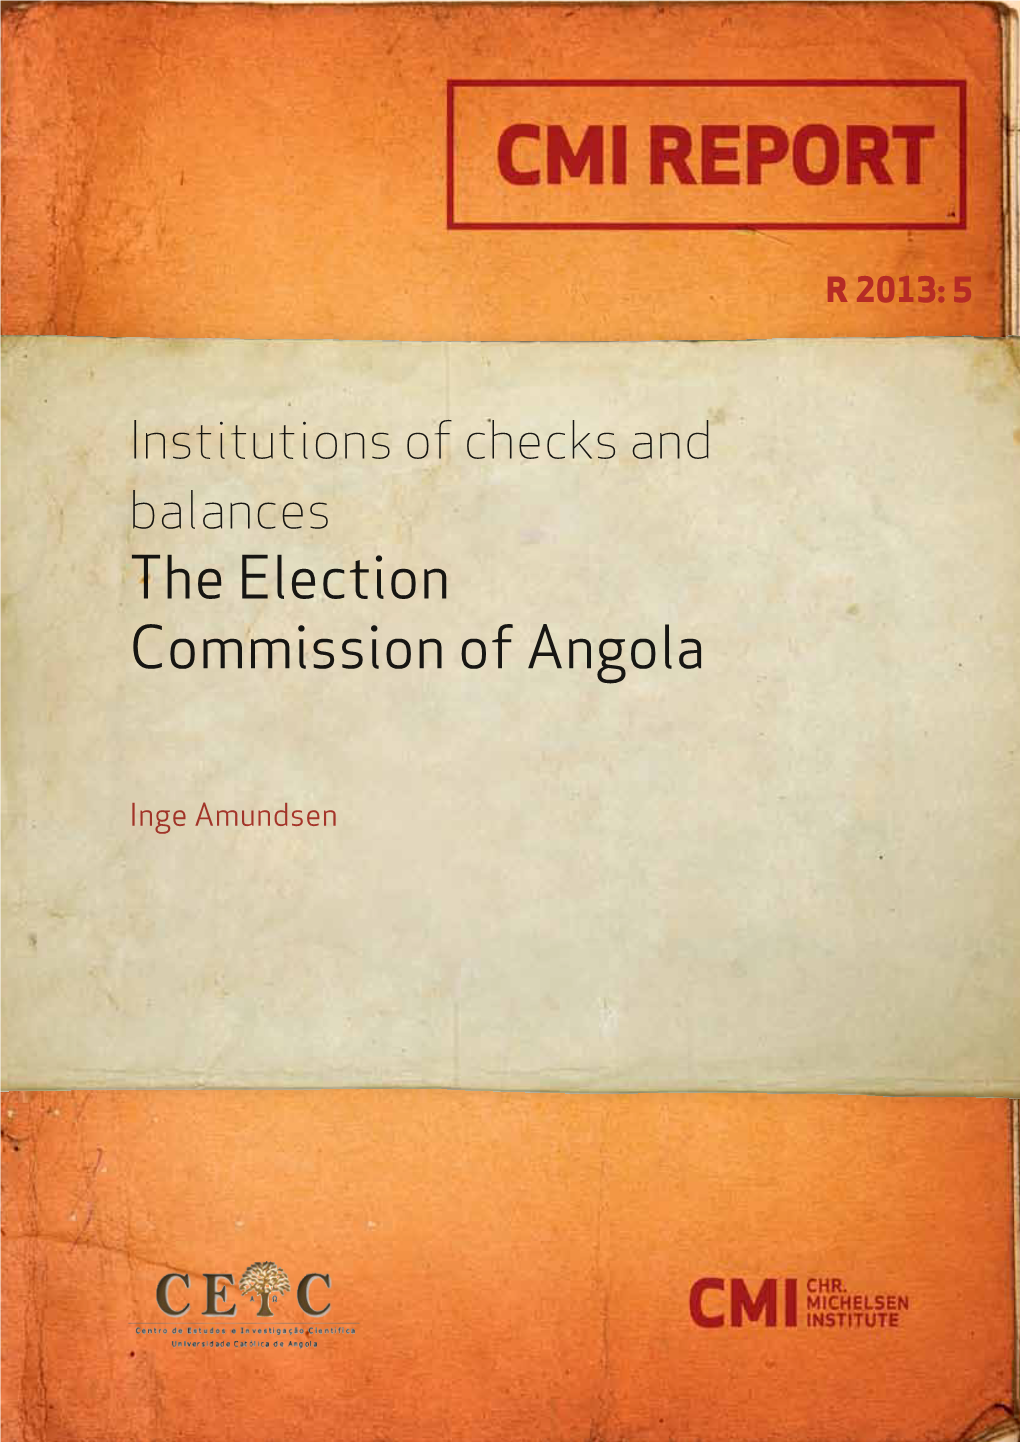 The Election Commission of Angola